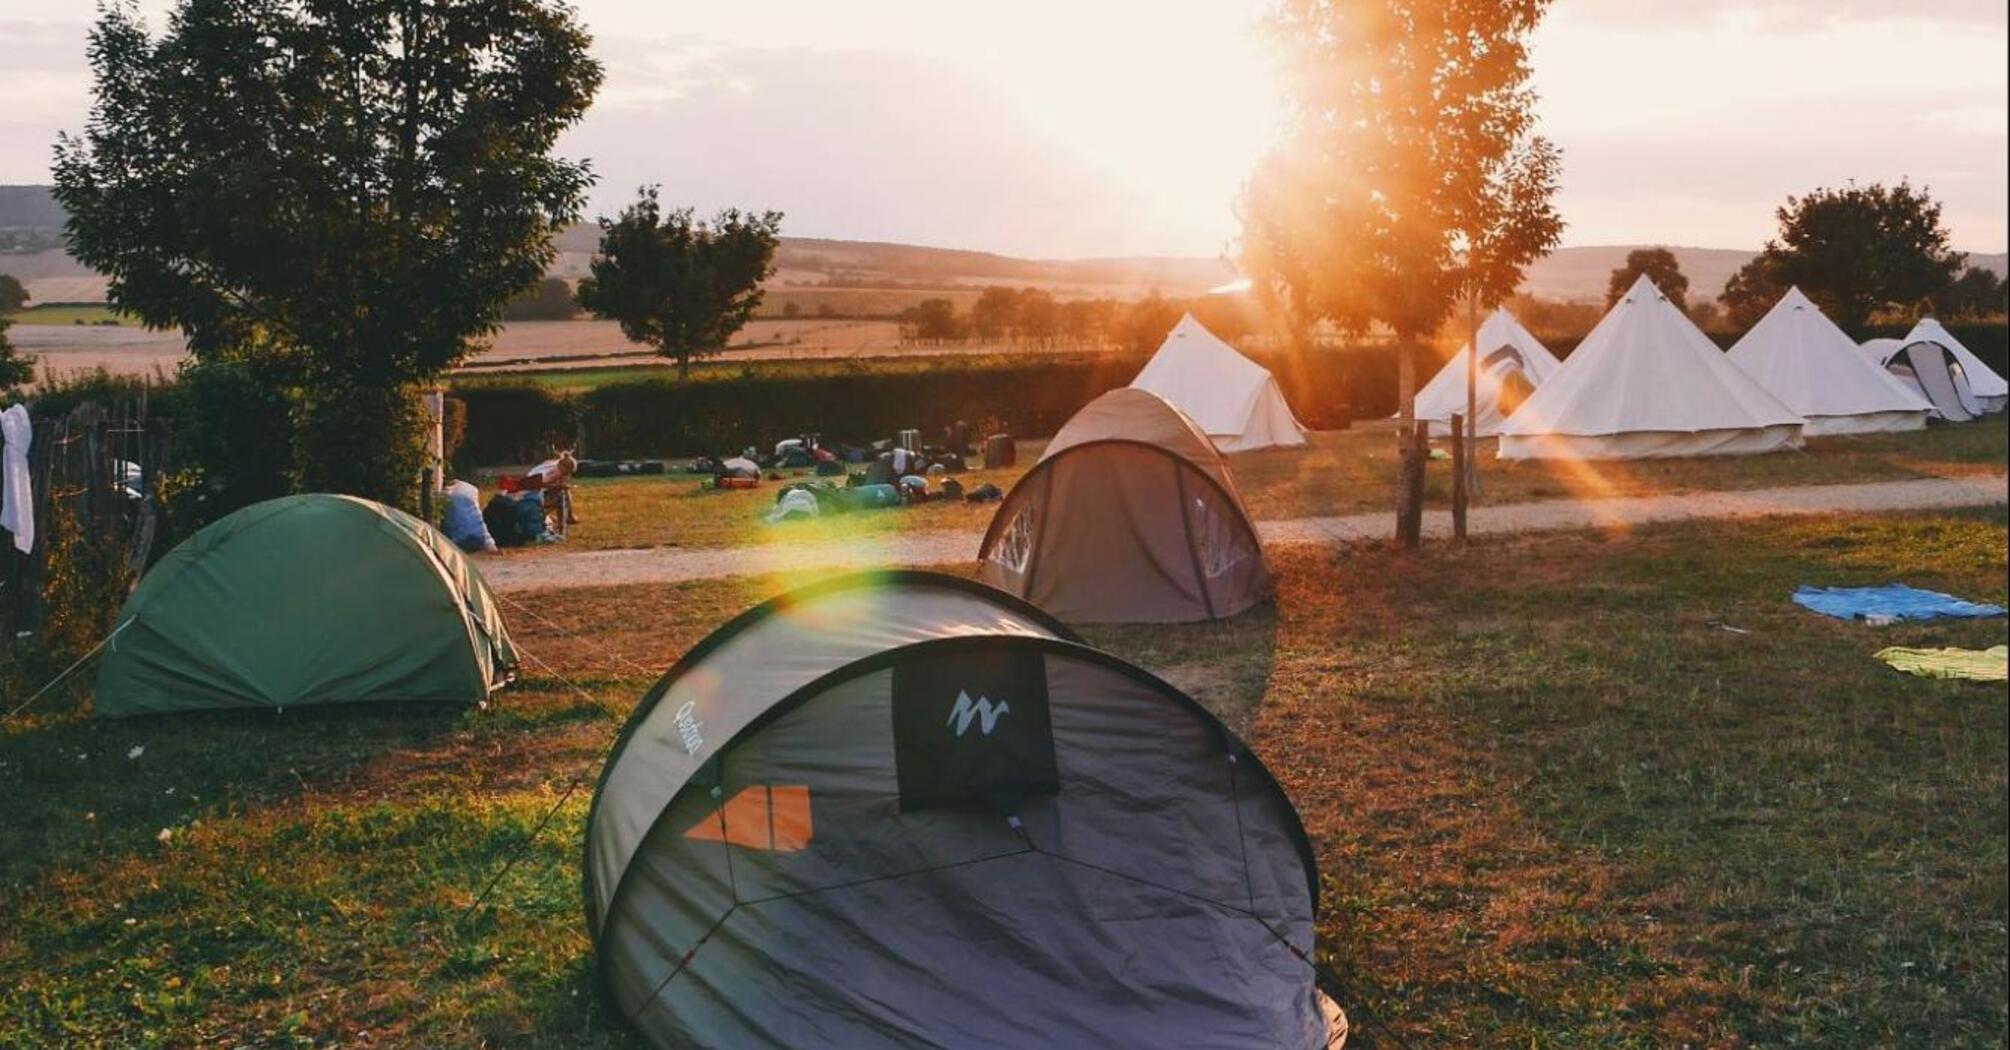 A sunrise view of tents and accommodations at a festival campsite